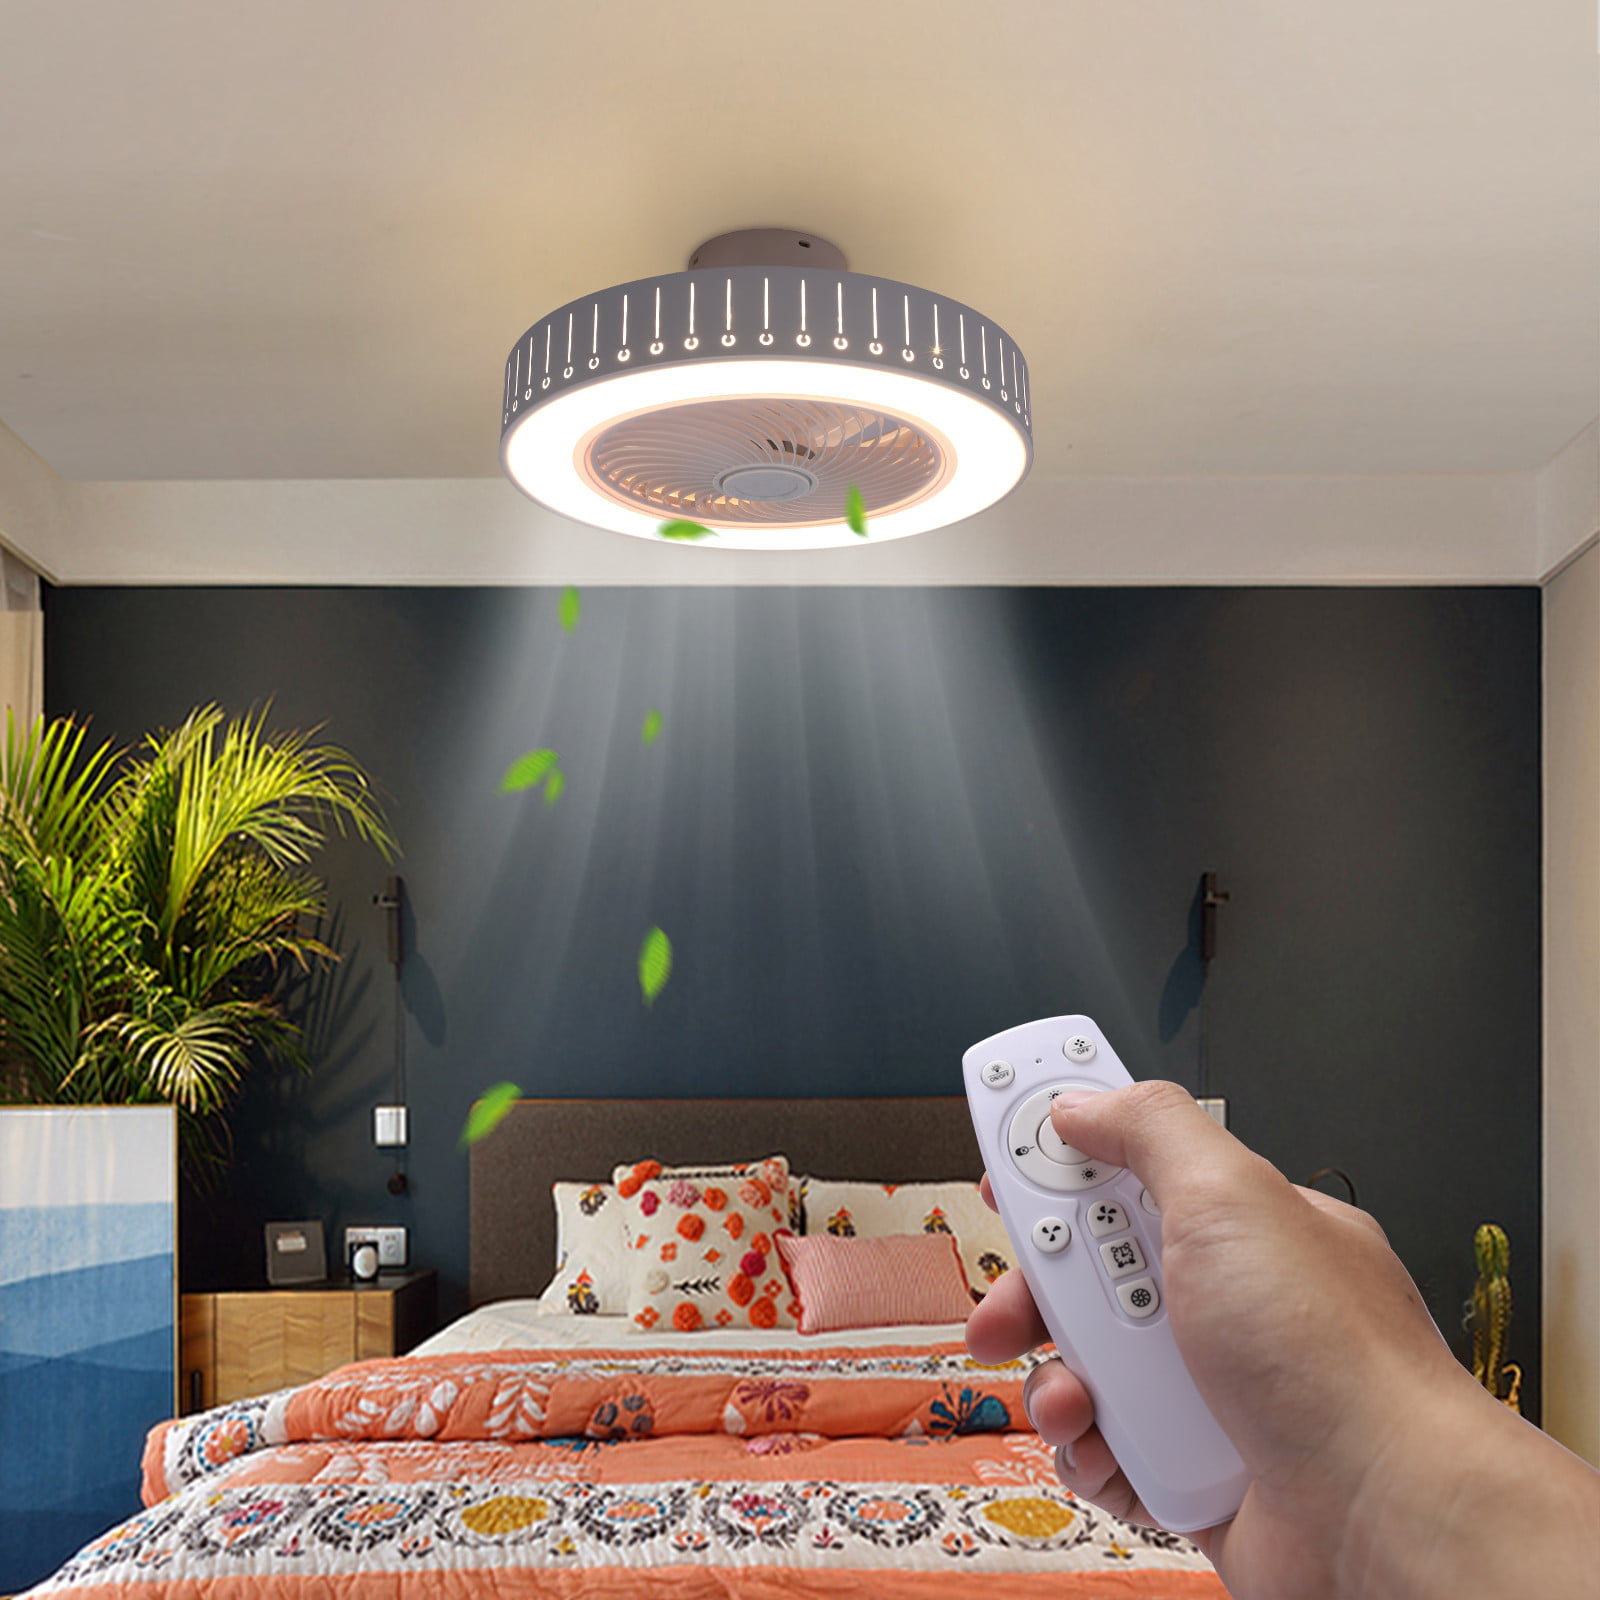 Details about   Modern LED Ceiling Fan Light Remote Control Bedroom Living Room Dimmable Lamp 